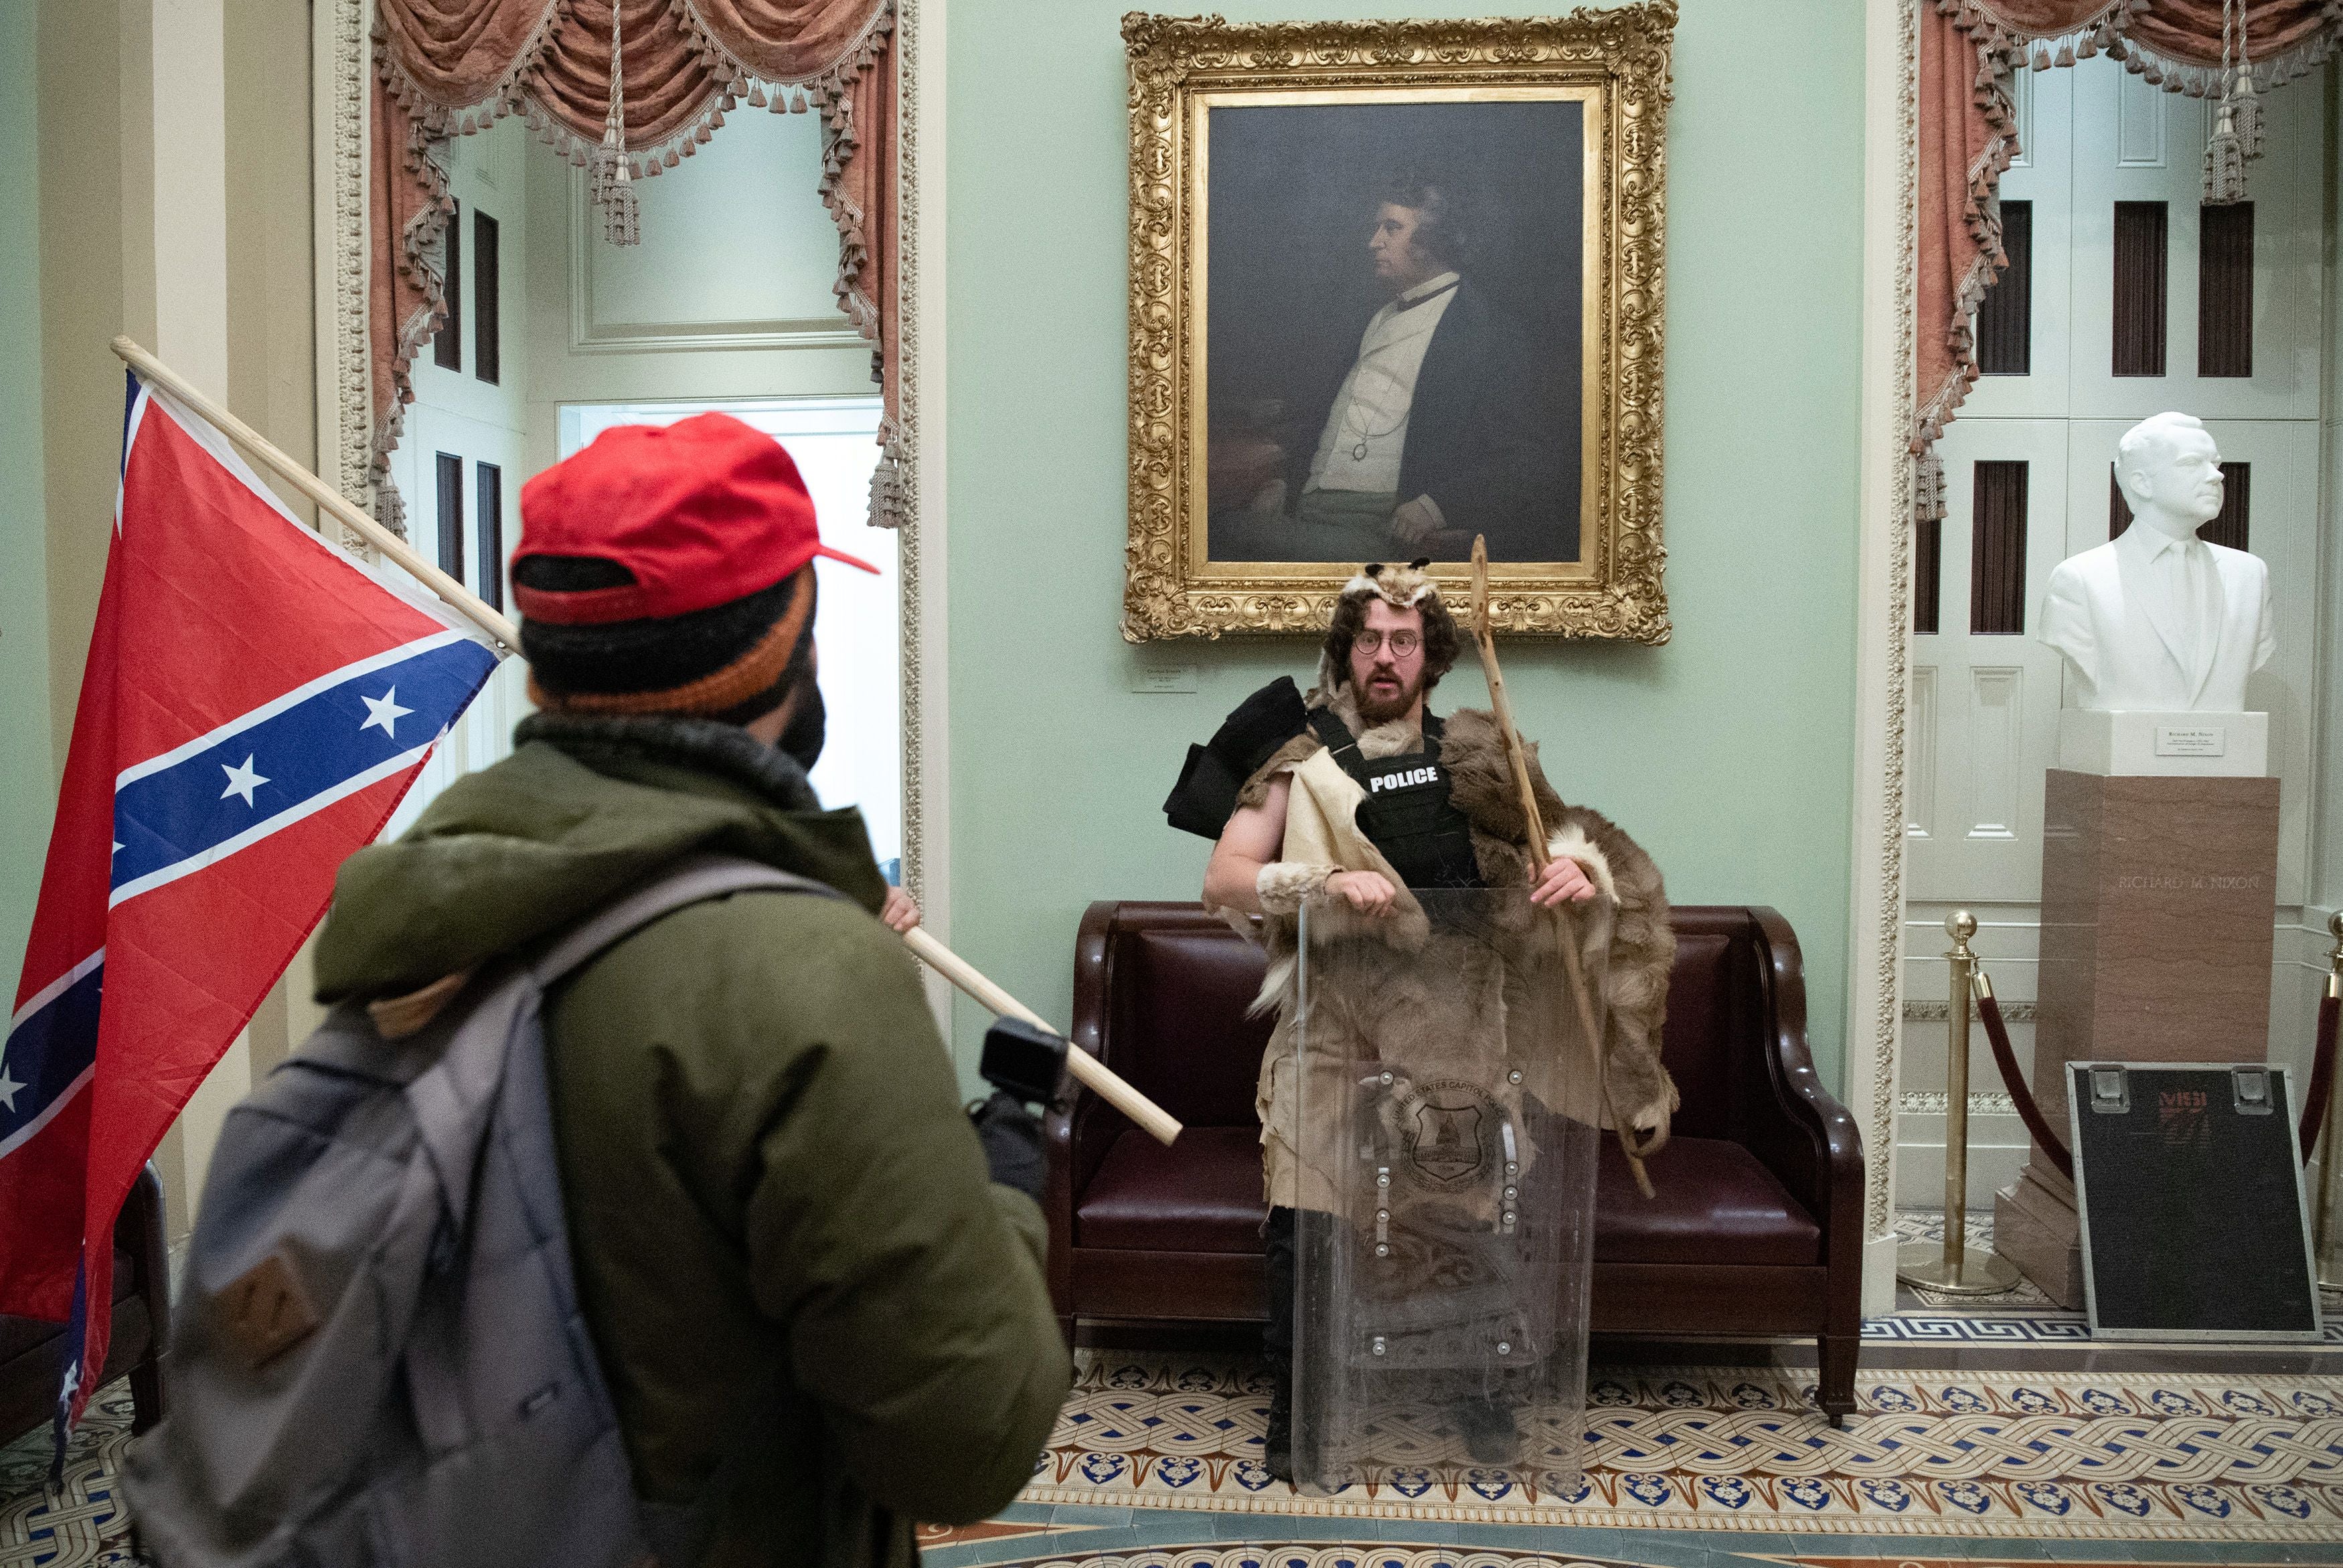 Aaron Mostofsky - dressed in fur - was among those arrested after Capitol riot